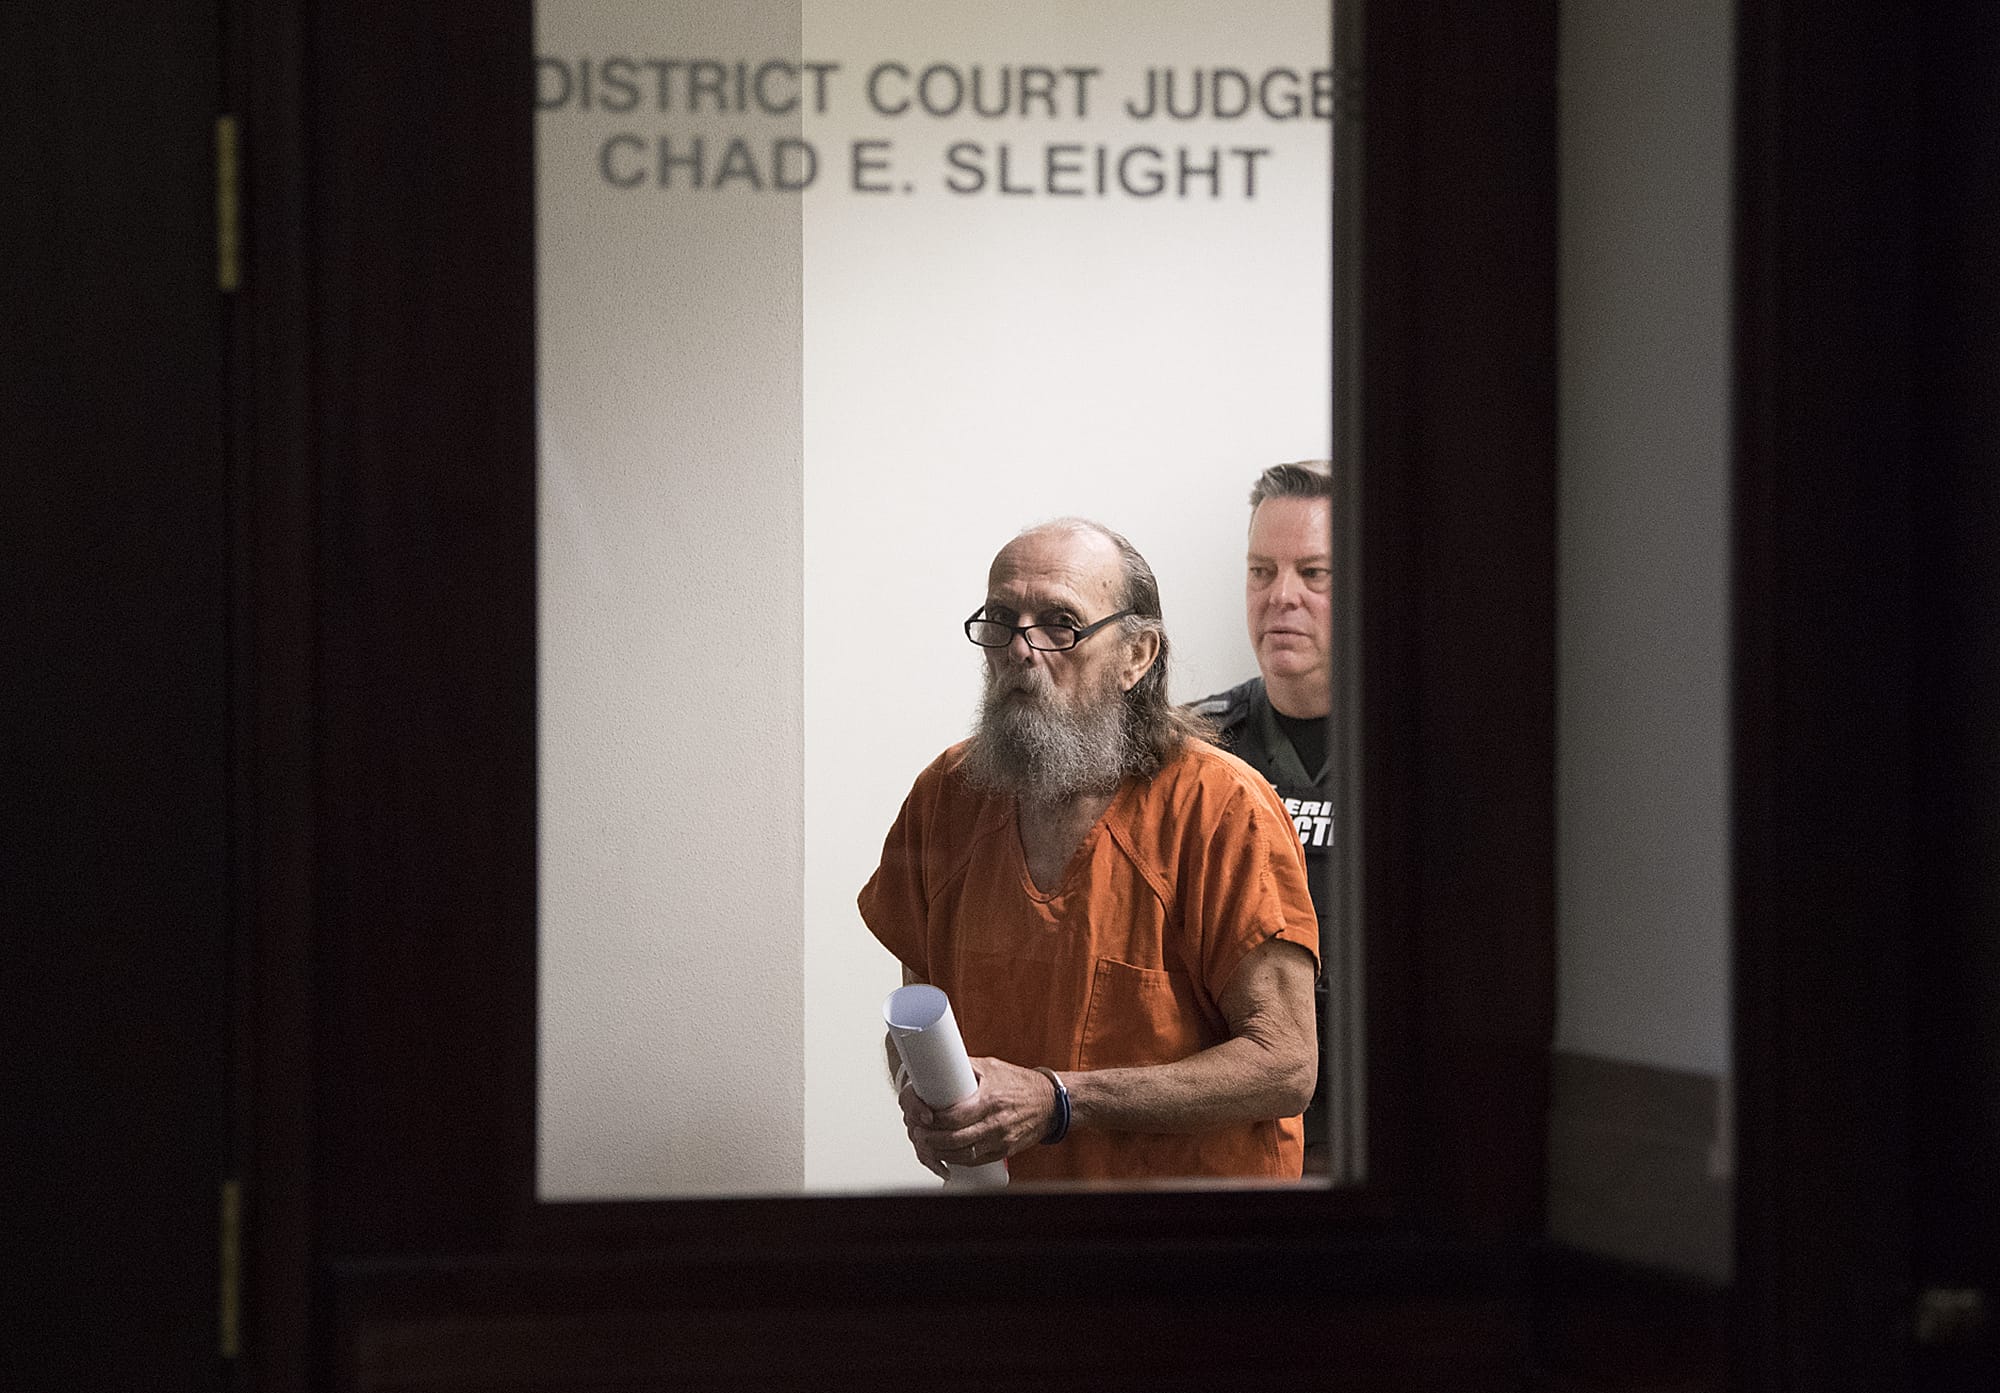 Suspected serial killer Warren Forrest leaves the courtroom after appearing in Clark County Superior Court in connection with the death of 17-year-old Martha Morrison in the 1970s on Friday morning, Jan. 10, 2020. Forrest was scheduled to be arraigned Friday, but the hearing was set over to Feb. 7.